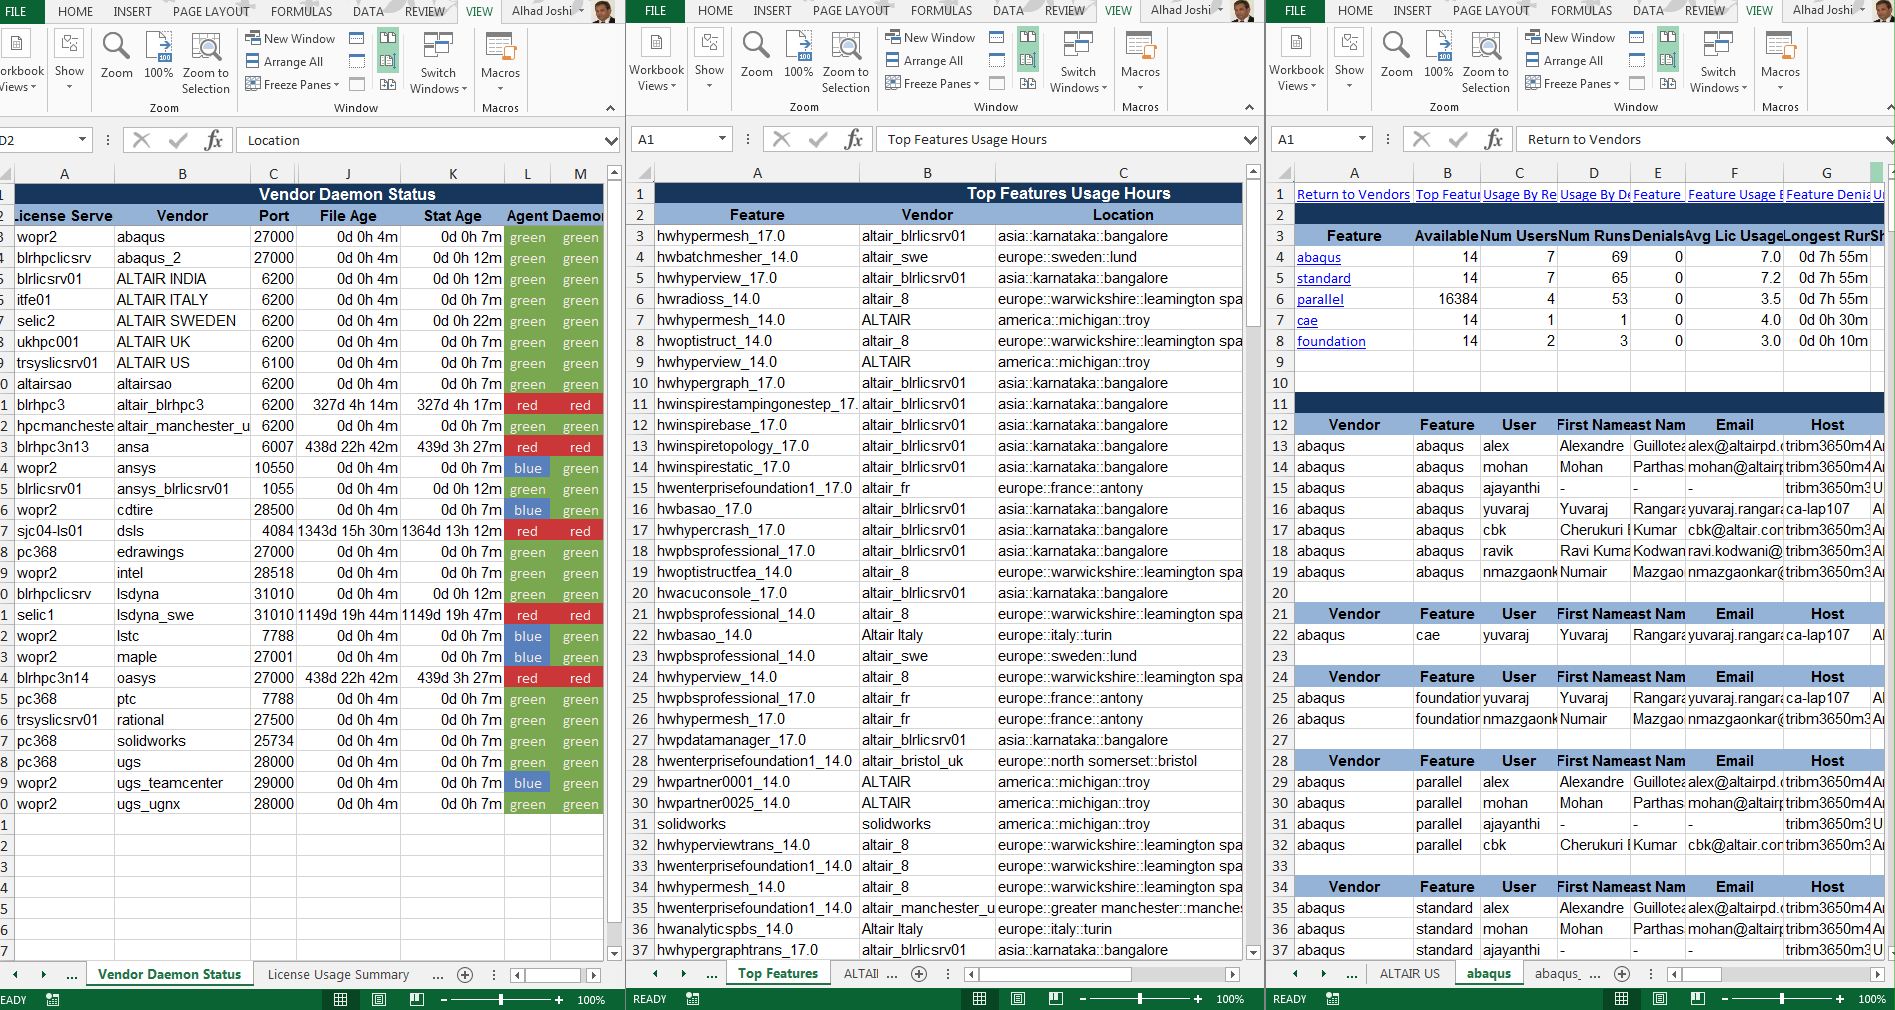 Stay informed with automated reports in a familiar, Excel-based format